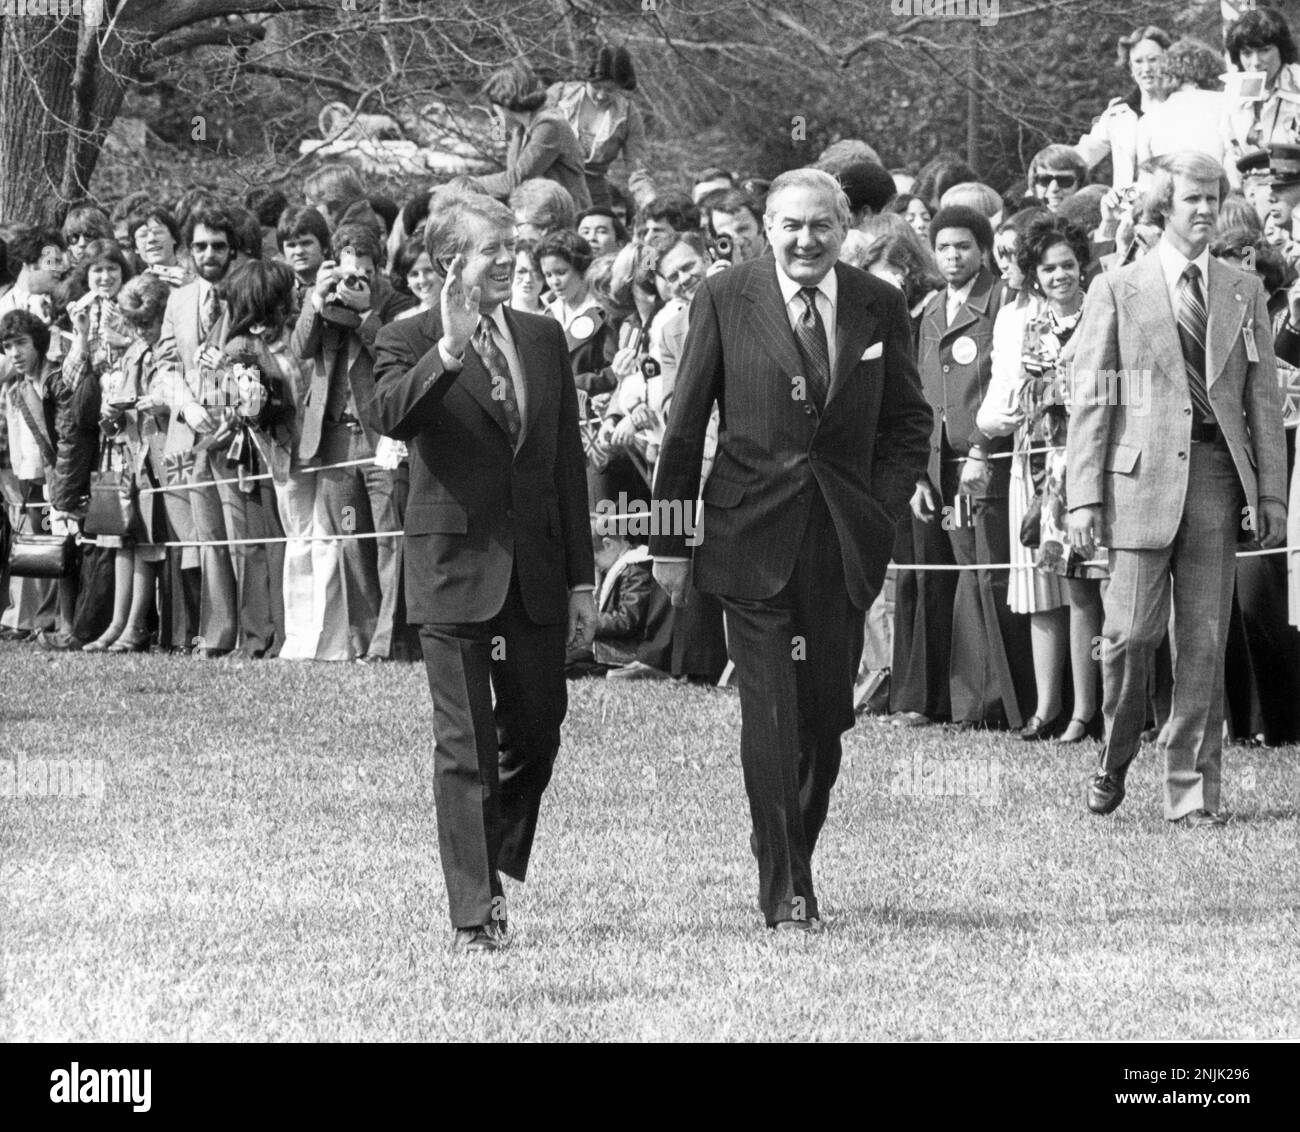 United States President Jimmy Carter, left, waves to the crowd after he and Prime Minister James Callaghan of the United Kingdom of Great Britain and Northern Ireland, right, finished trooping the line during the Official Arrival ceremony on the South Lawn of the White House in Washington, DC on March 10, 1977Credit: Benjamin E. 'Gene' Forte/CNP/Sipa USA Credit: Sipa USA/Alamy Live News Stock Photo